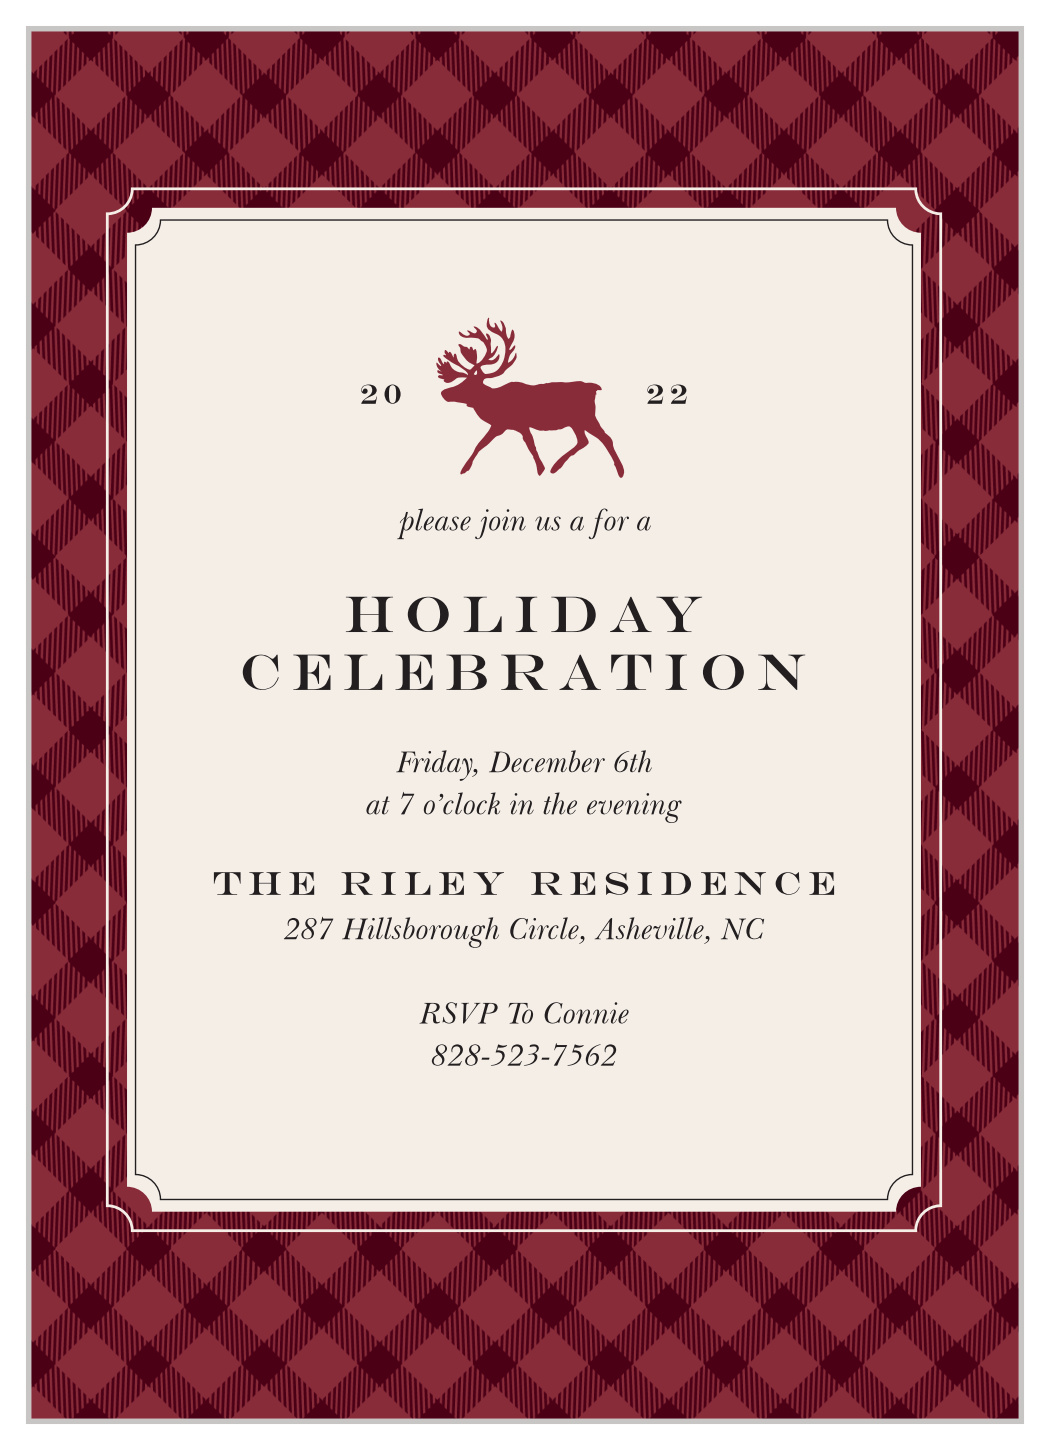 Country Moose Holiday Invitations